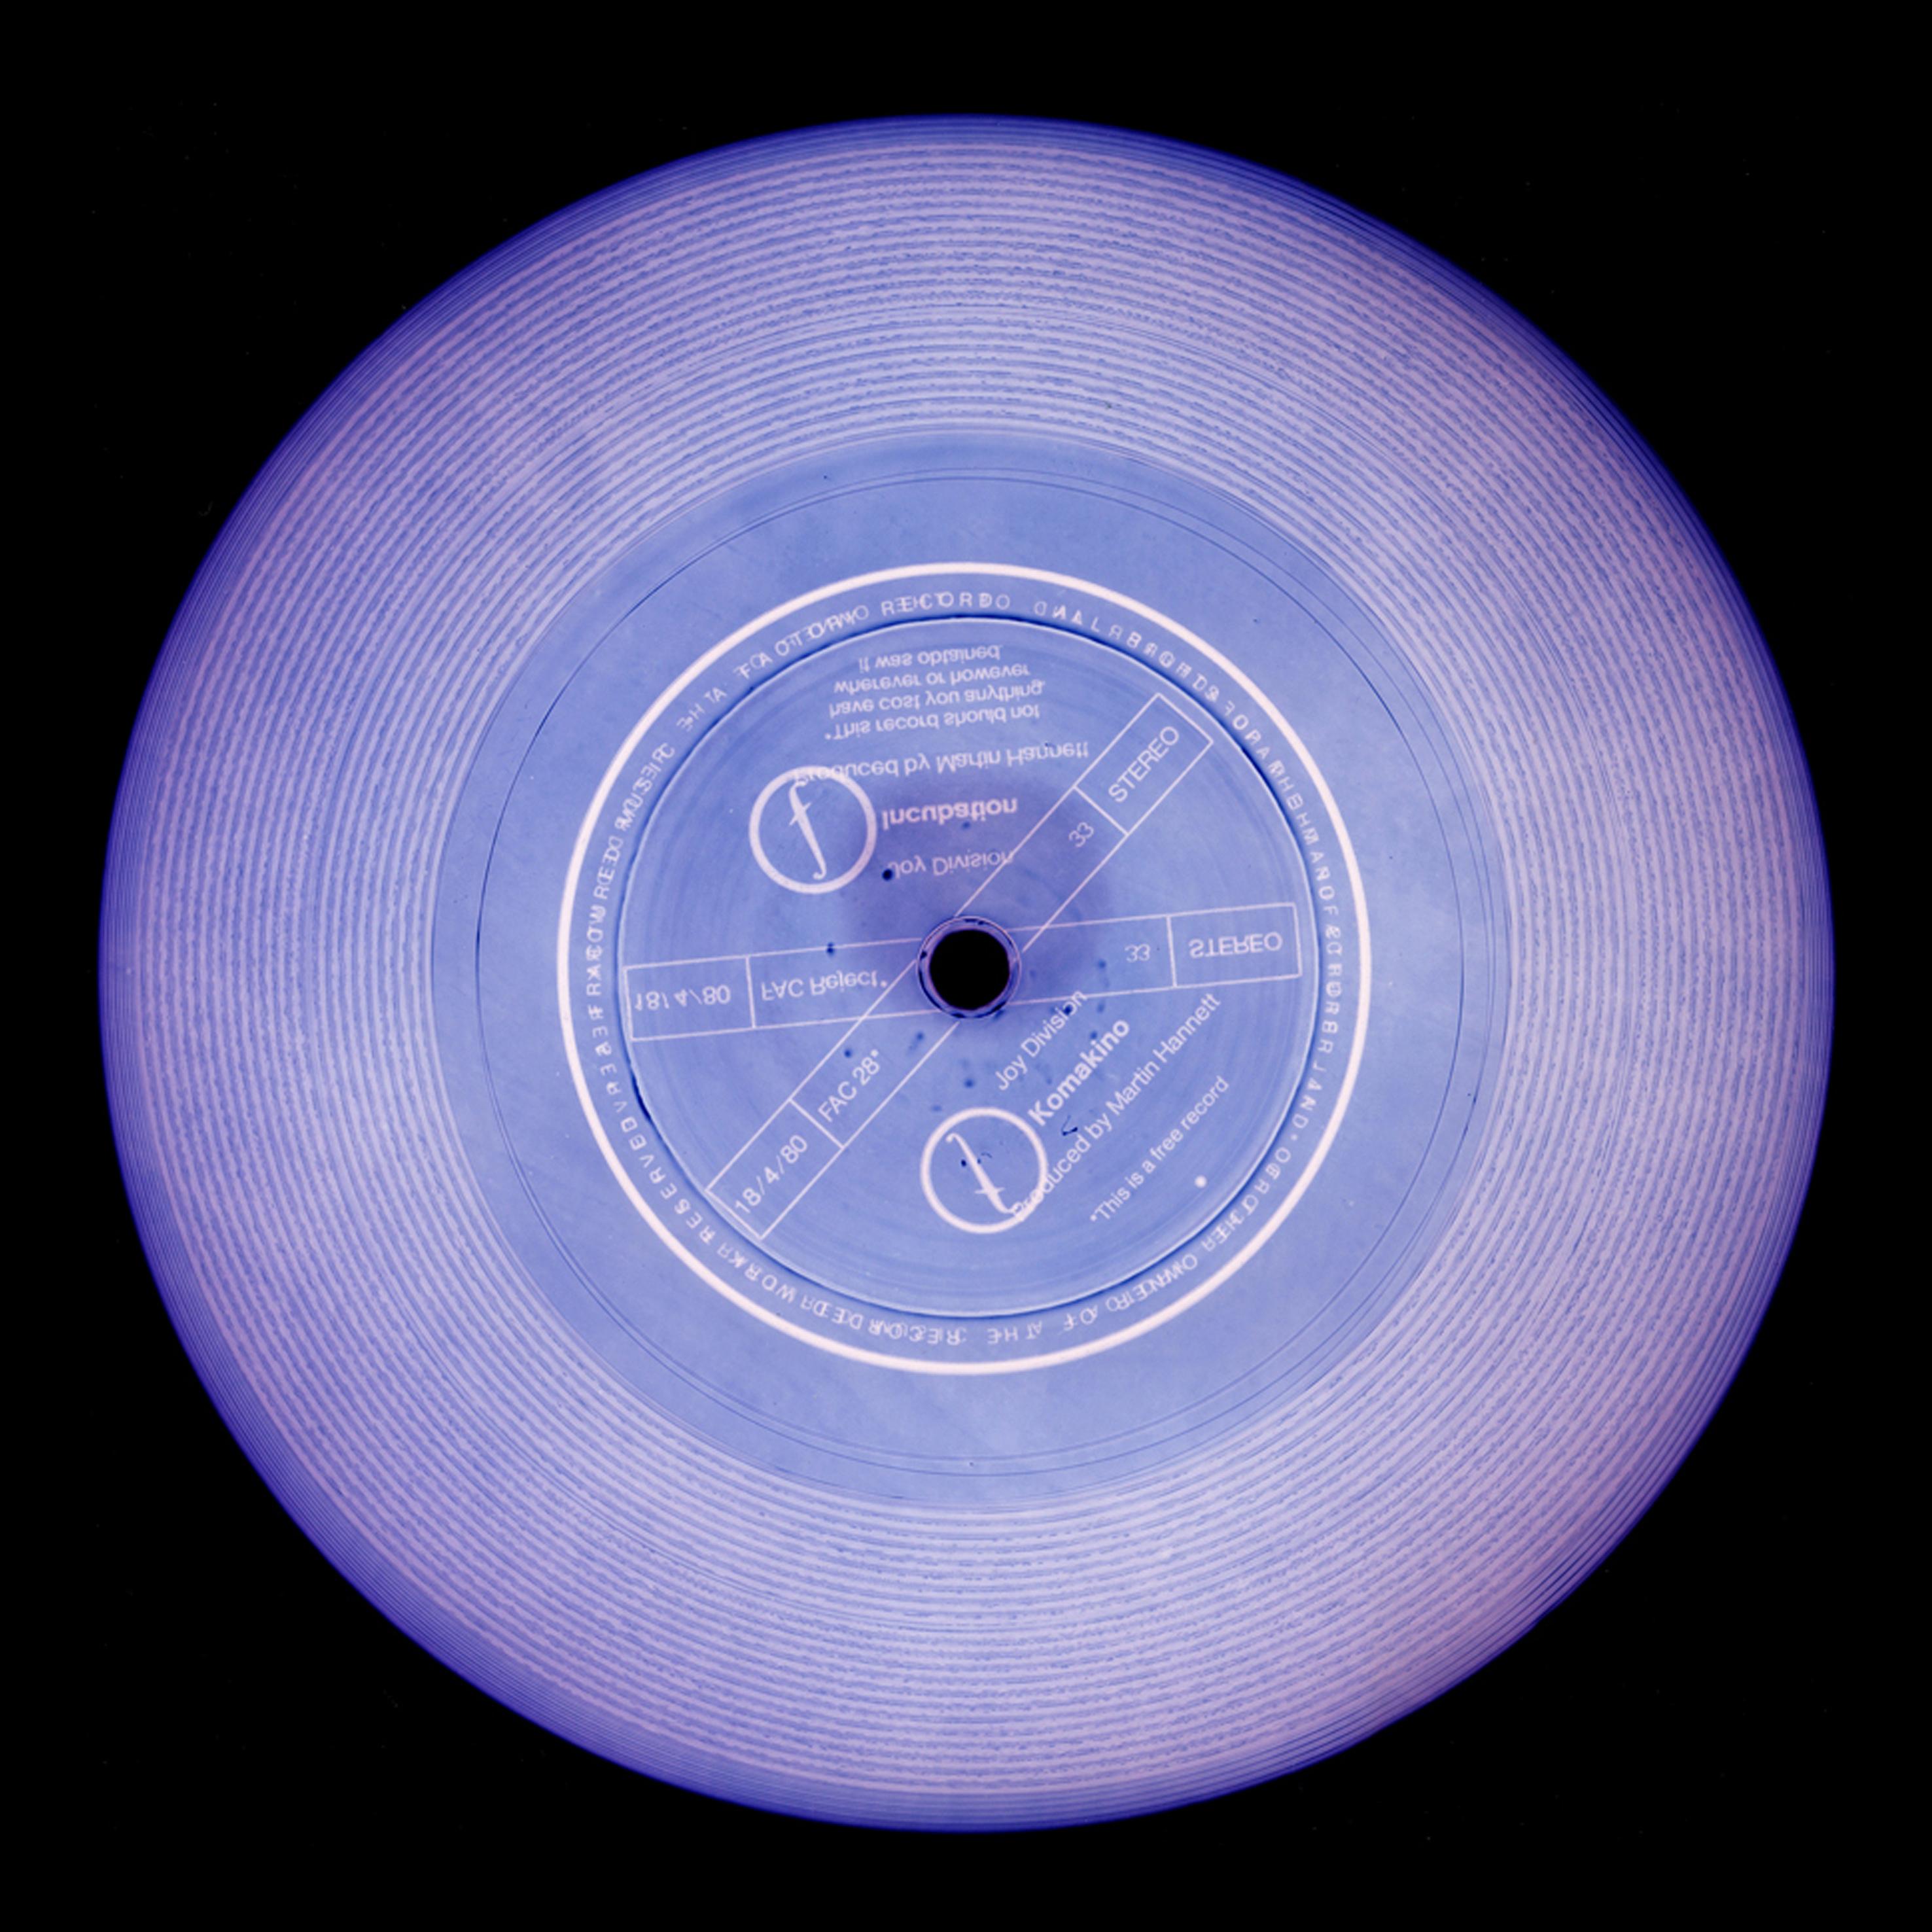 Print Heidler & Heeps - Collection Vinyl, This is a Free Record (Lavender) - Photographie conceptuelle